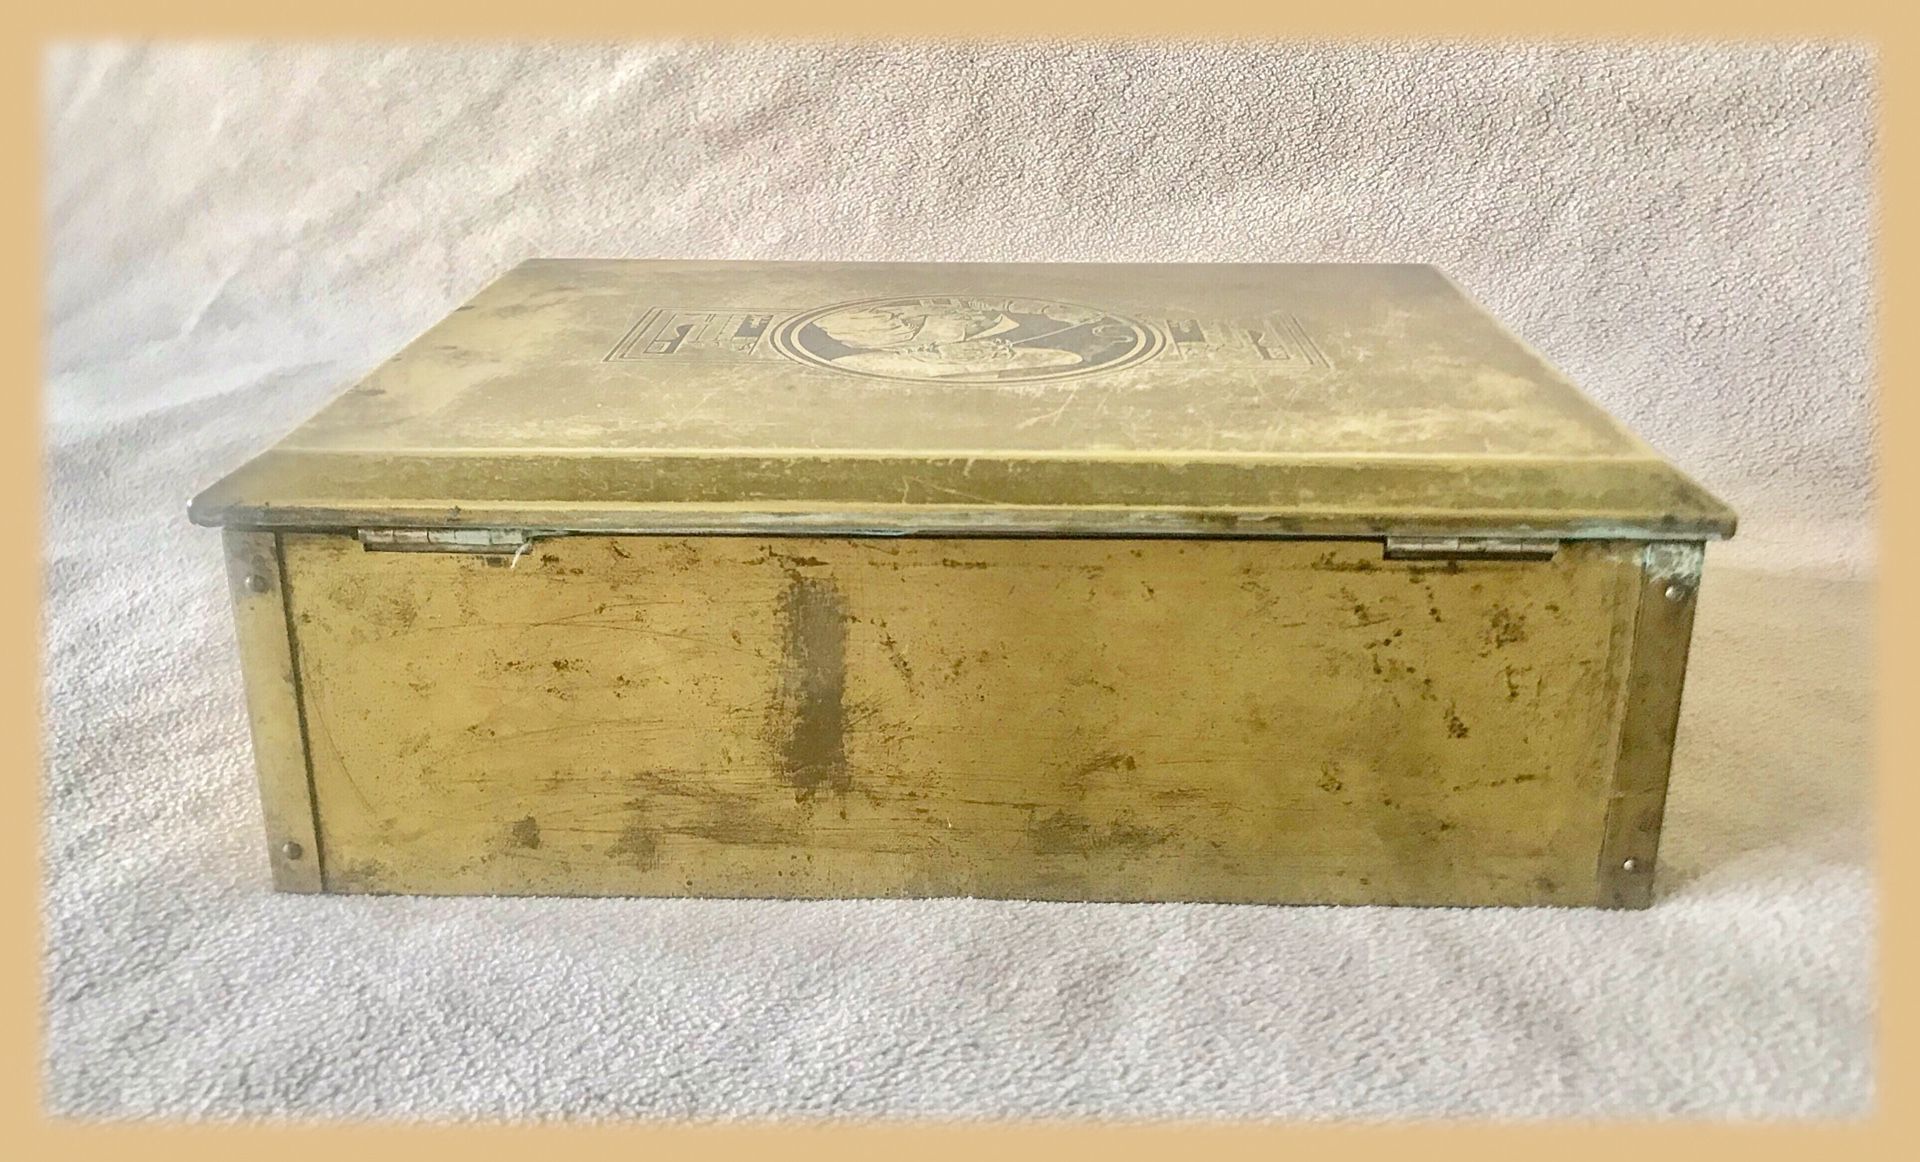 ANTIQUE ETCHED CAVALIER BRASS HUMIDOR TOBACCO BOX GRAMMES ALLENTOWN for ...